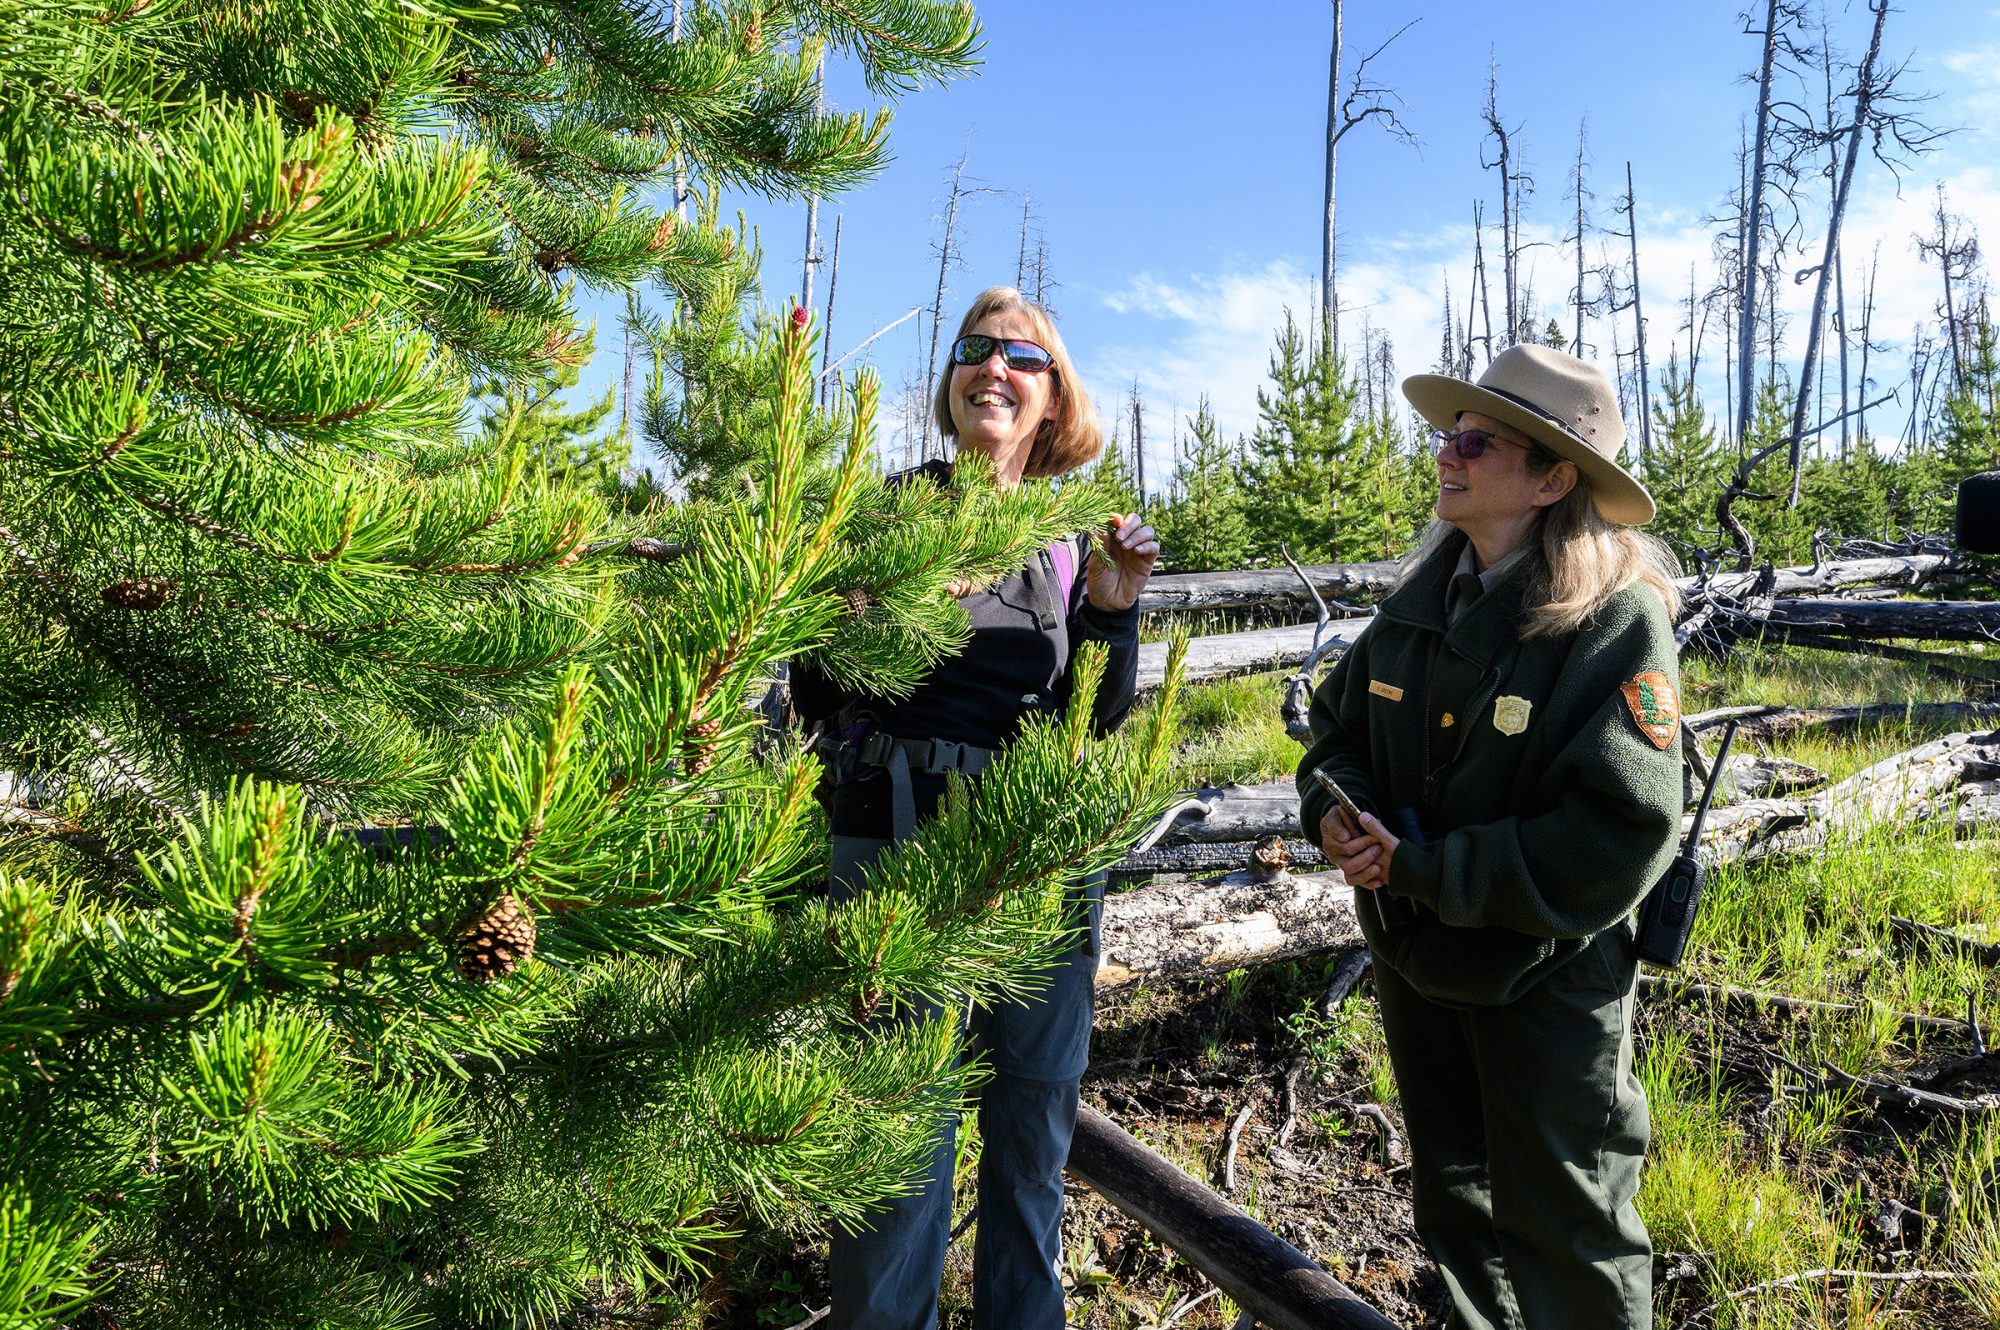 A woman stands looking up at an evergreen tree while a park ranger looks on.